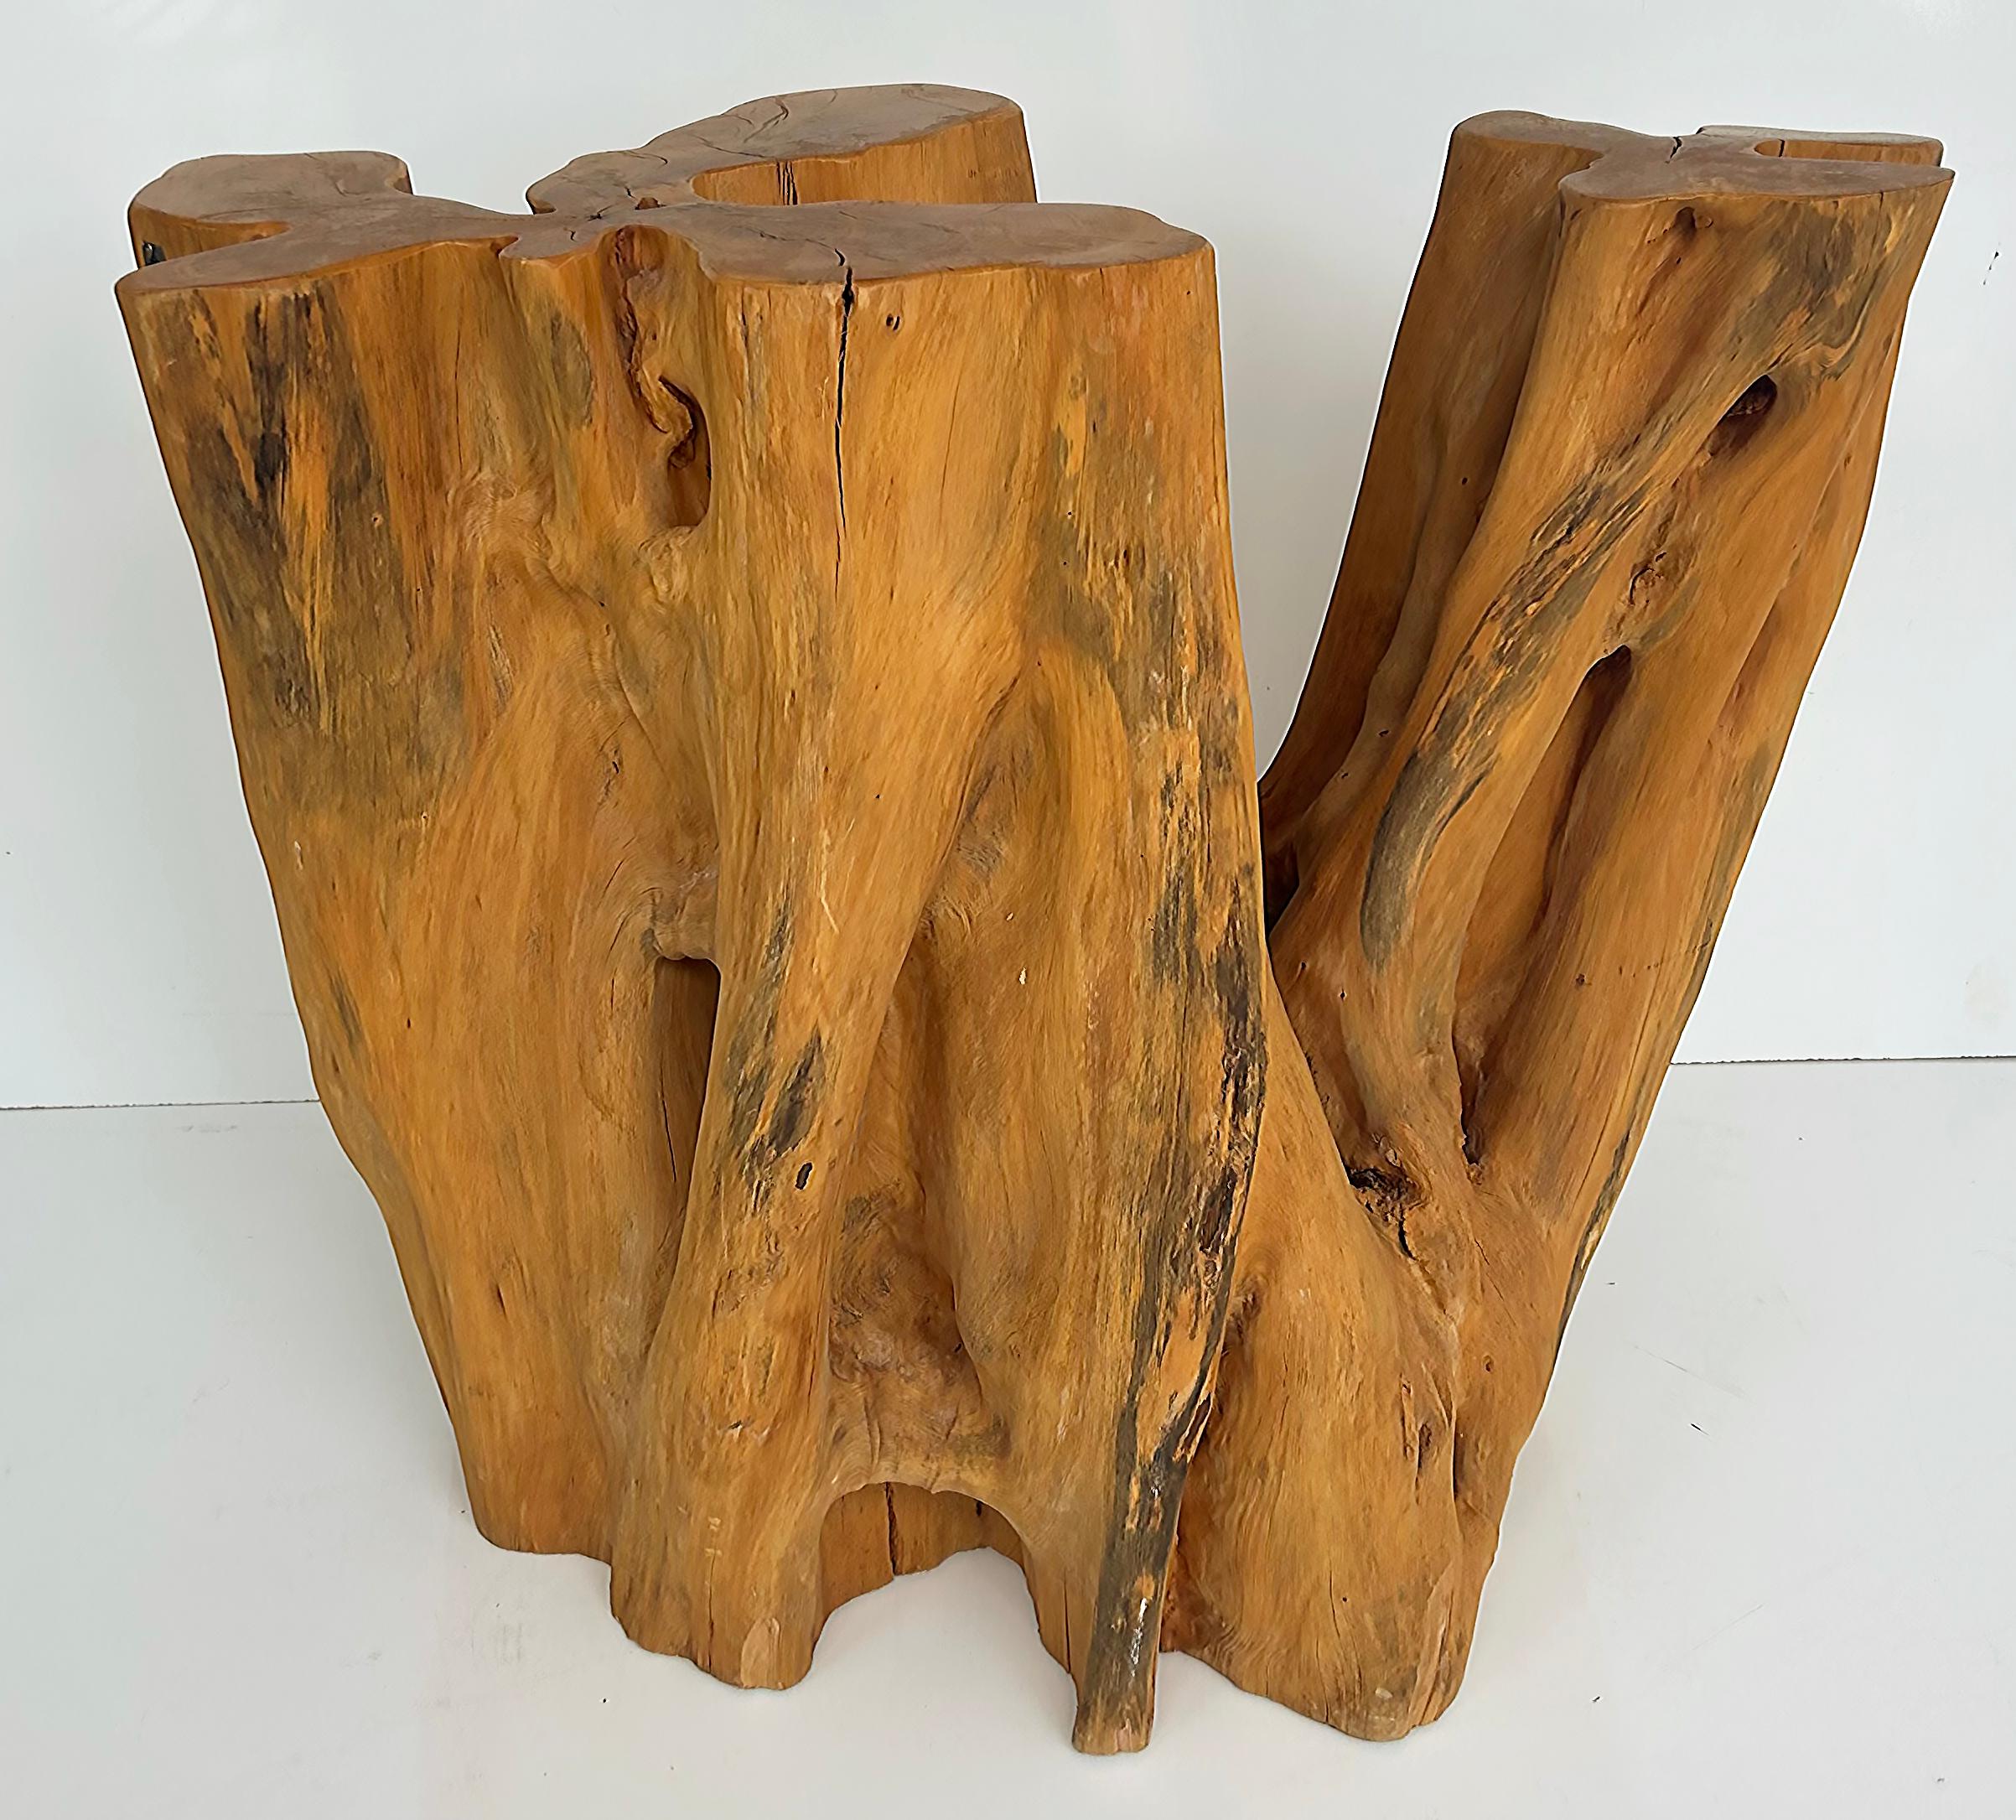 Organic Modern Brazilian Amazonia Guaranta Dining Table Base, Reclaimed Wood

Offered for sale is an organic modern reclaimed Guaranta Brazilian Amazonia wood table base. The base is naturally irregular with interesting textures and natural folds. 